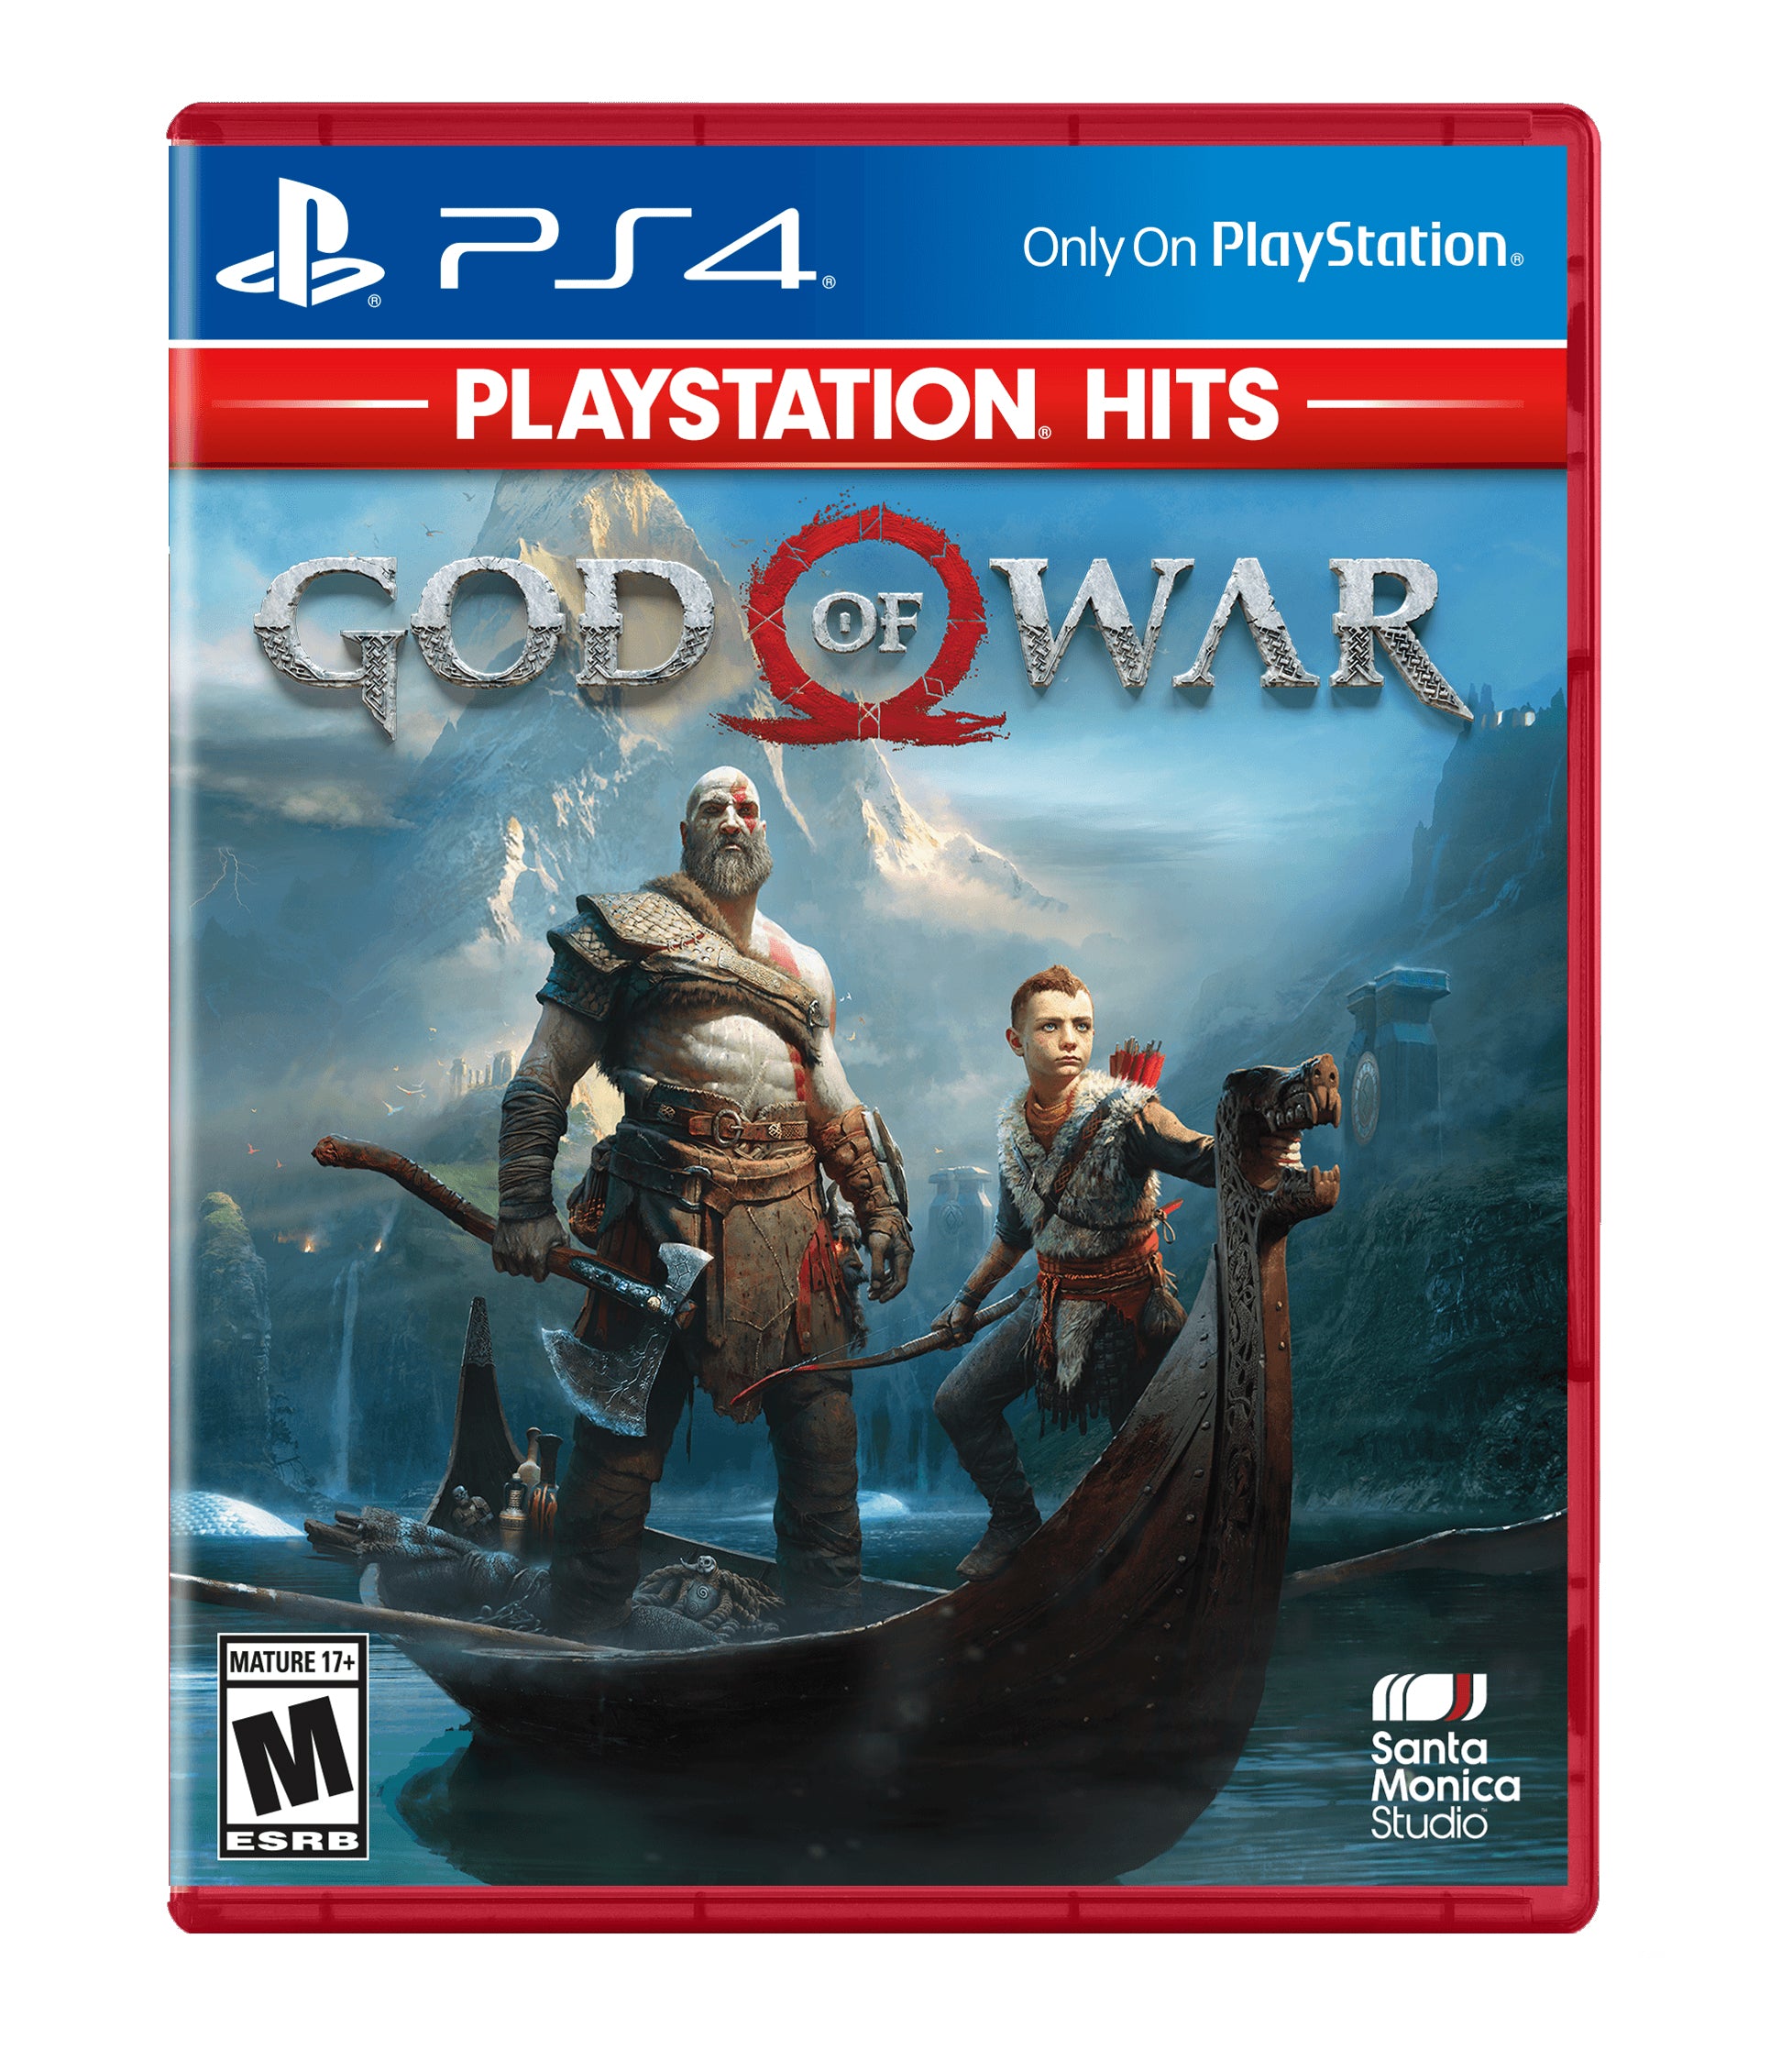 Sony PlayStation 4 Slim God of War PlayStation Hits Bundle 1TB PS4 Gaming Console, Jet Black, with Mytrix Chat Headset